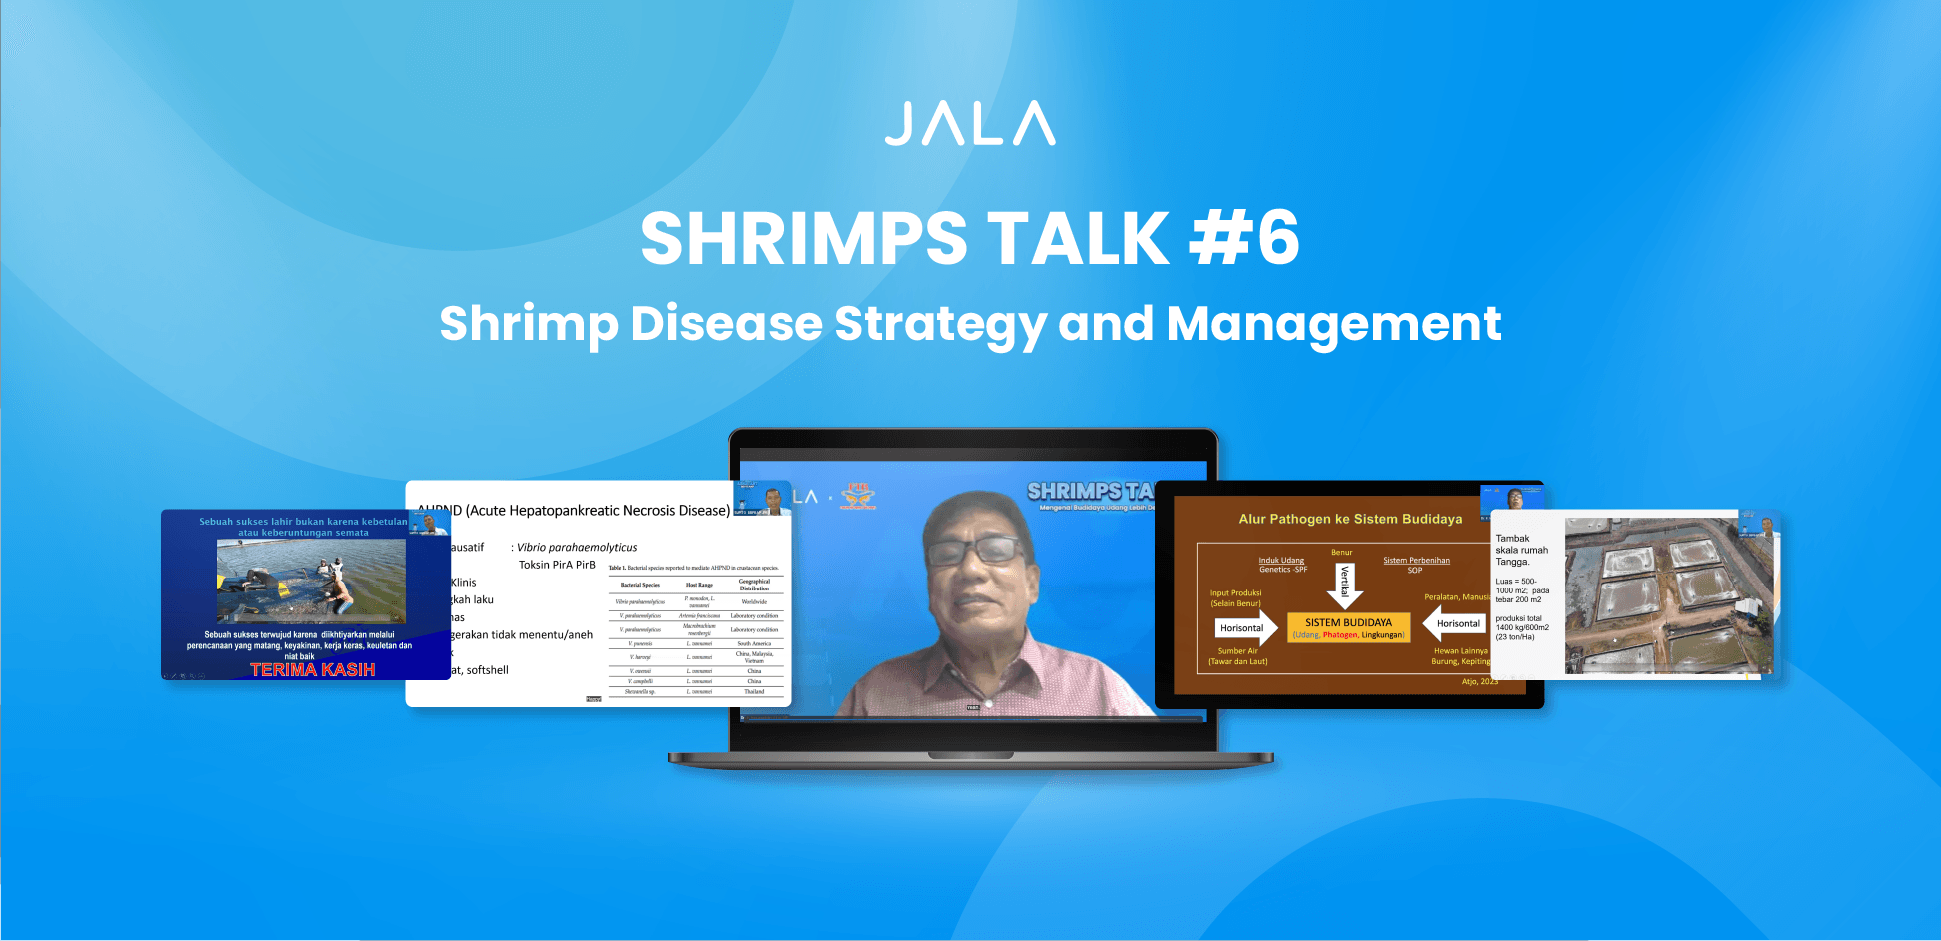 Hand-in-Hand in Learning to Face Shrimp Diseases through SHRIMPS TALK #6